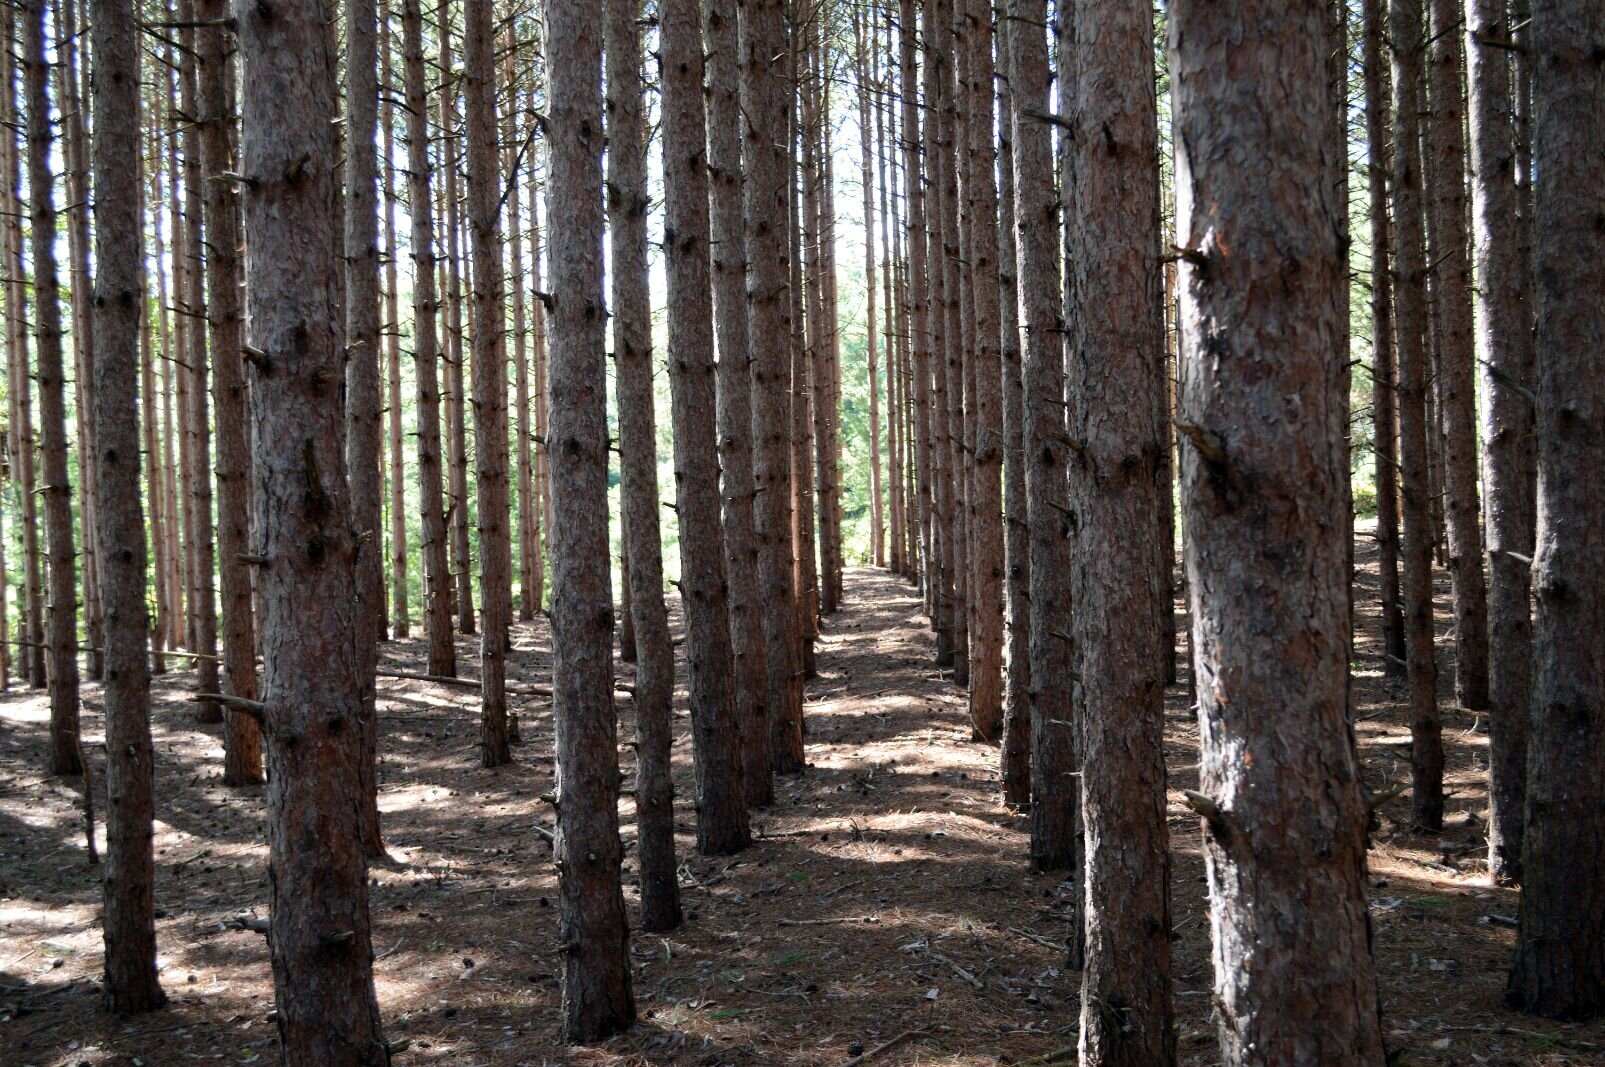 Pine plantation, likely from the CCC’s efforts to reforest Michigan during the Great Depression.